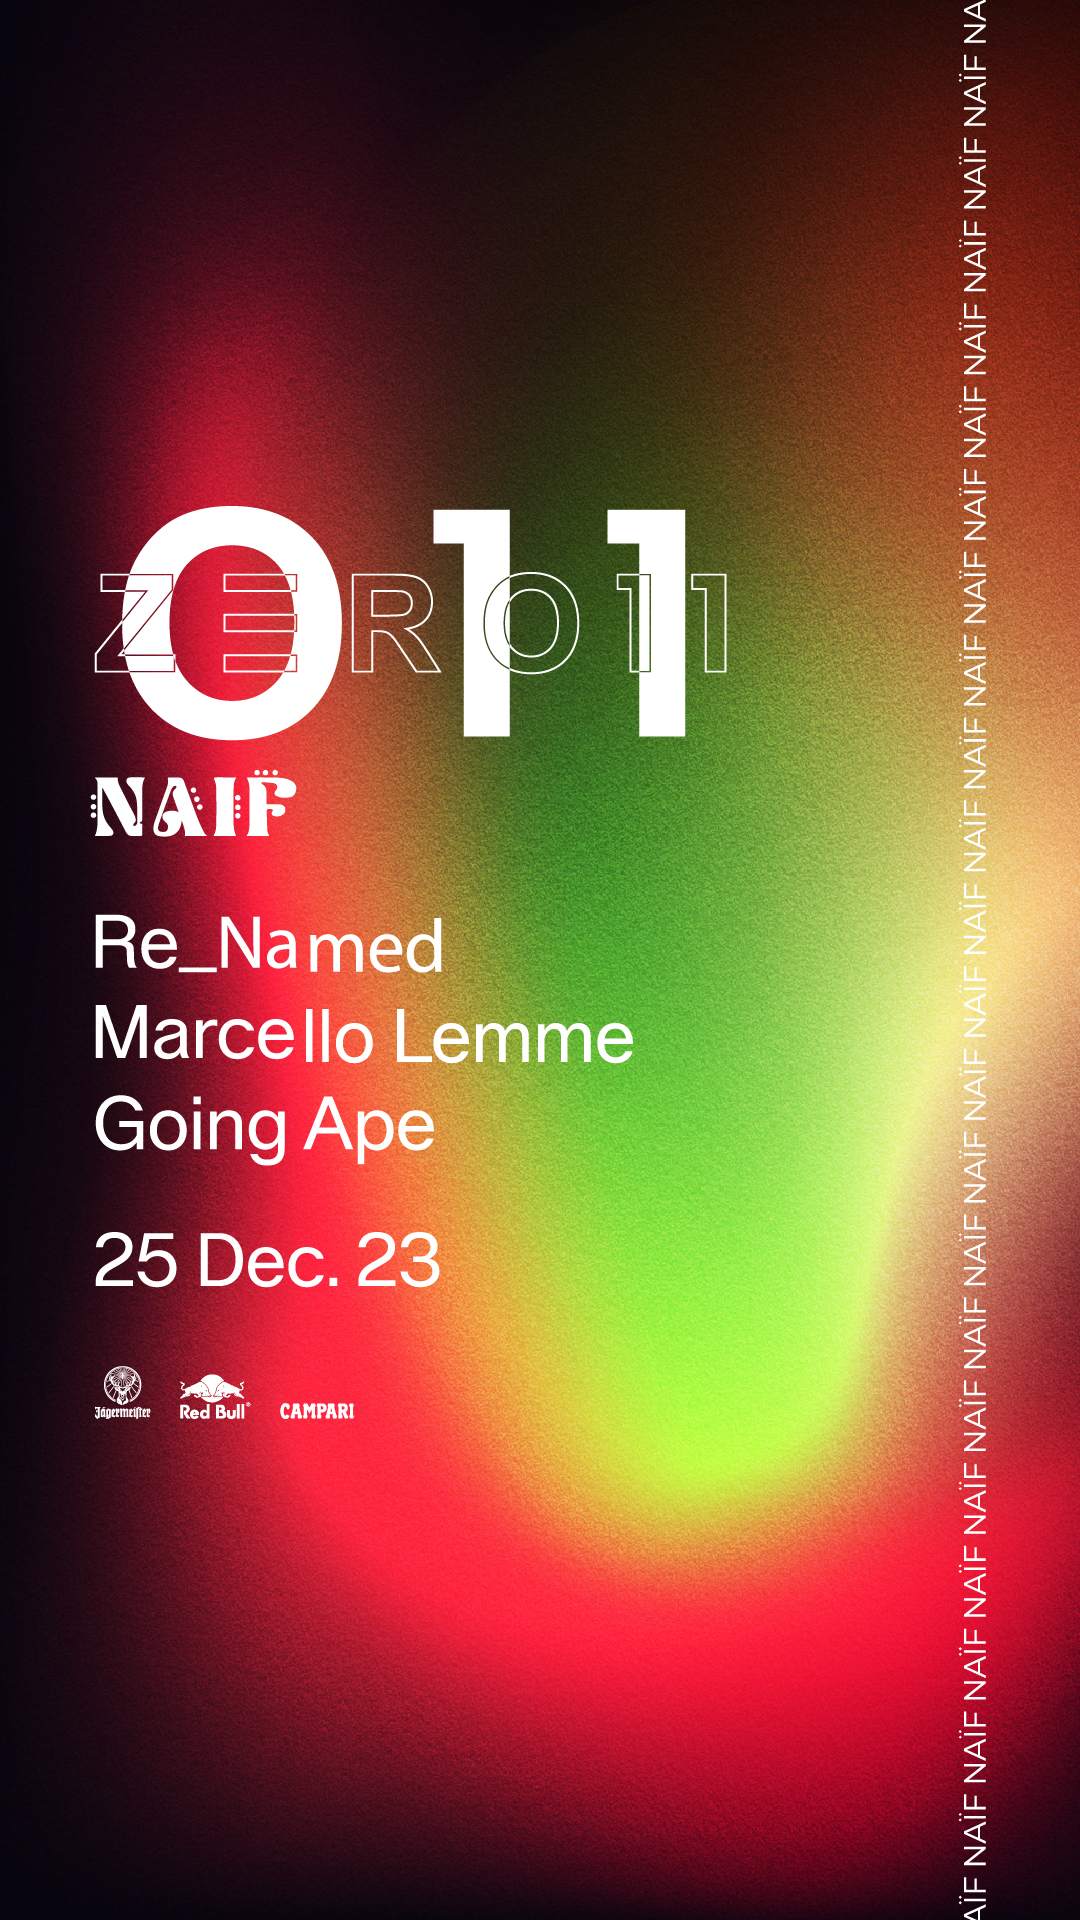 Club Zero11 pres. NAIF with Re_Named, Marcello Lemme, Going Ape - Página trasera